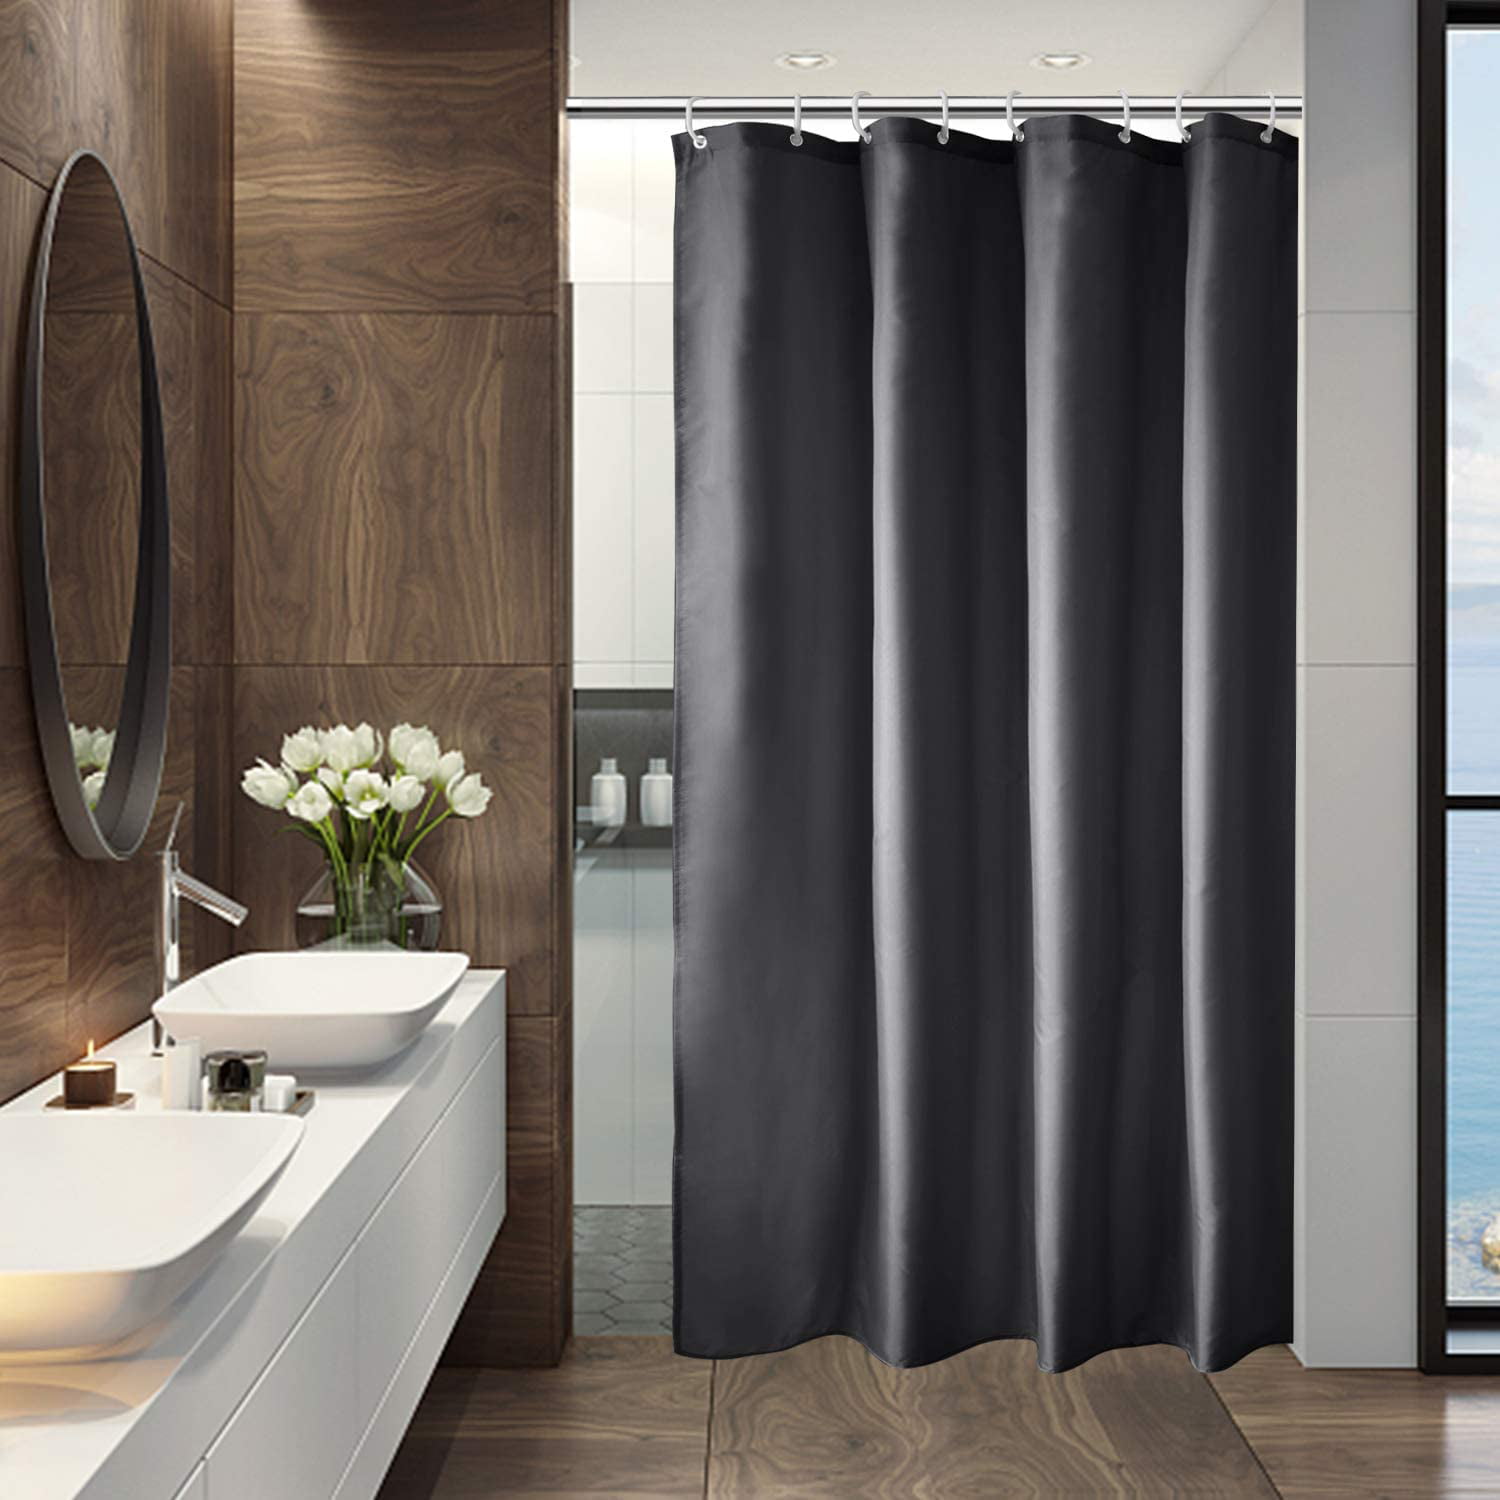 Details about   Aoohome Shower Curtain Solid Fabric Bathroom Curtain 36" x 72" Dark Grey 